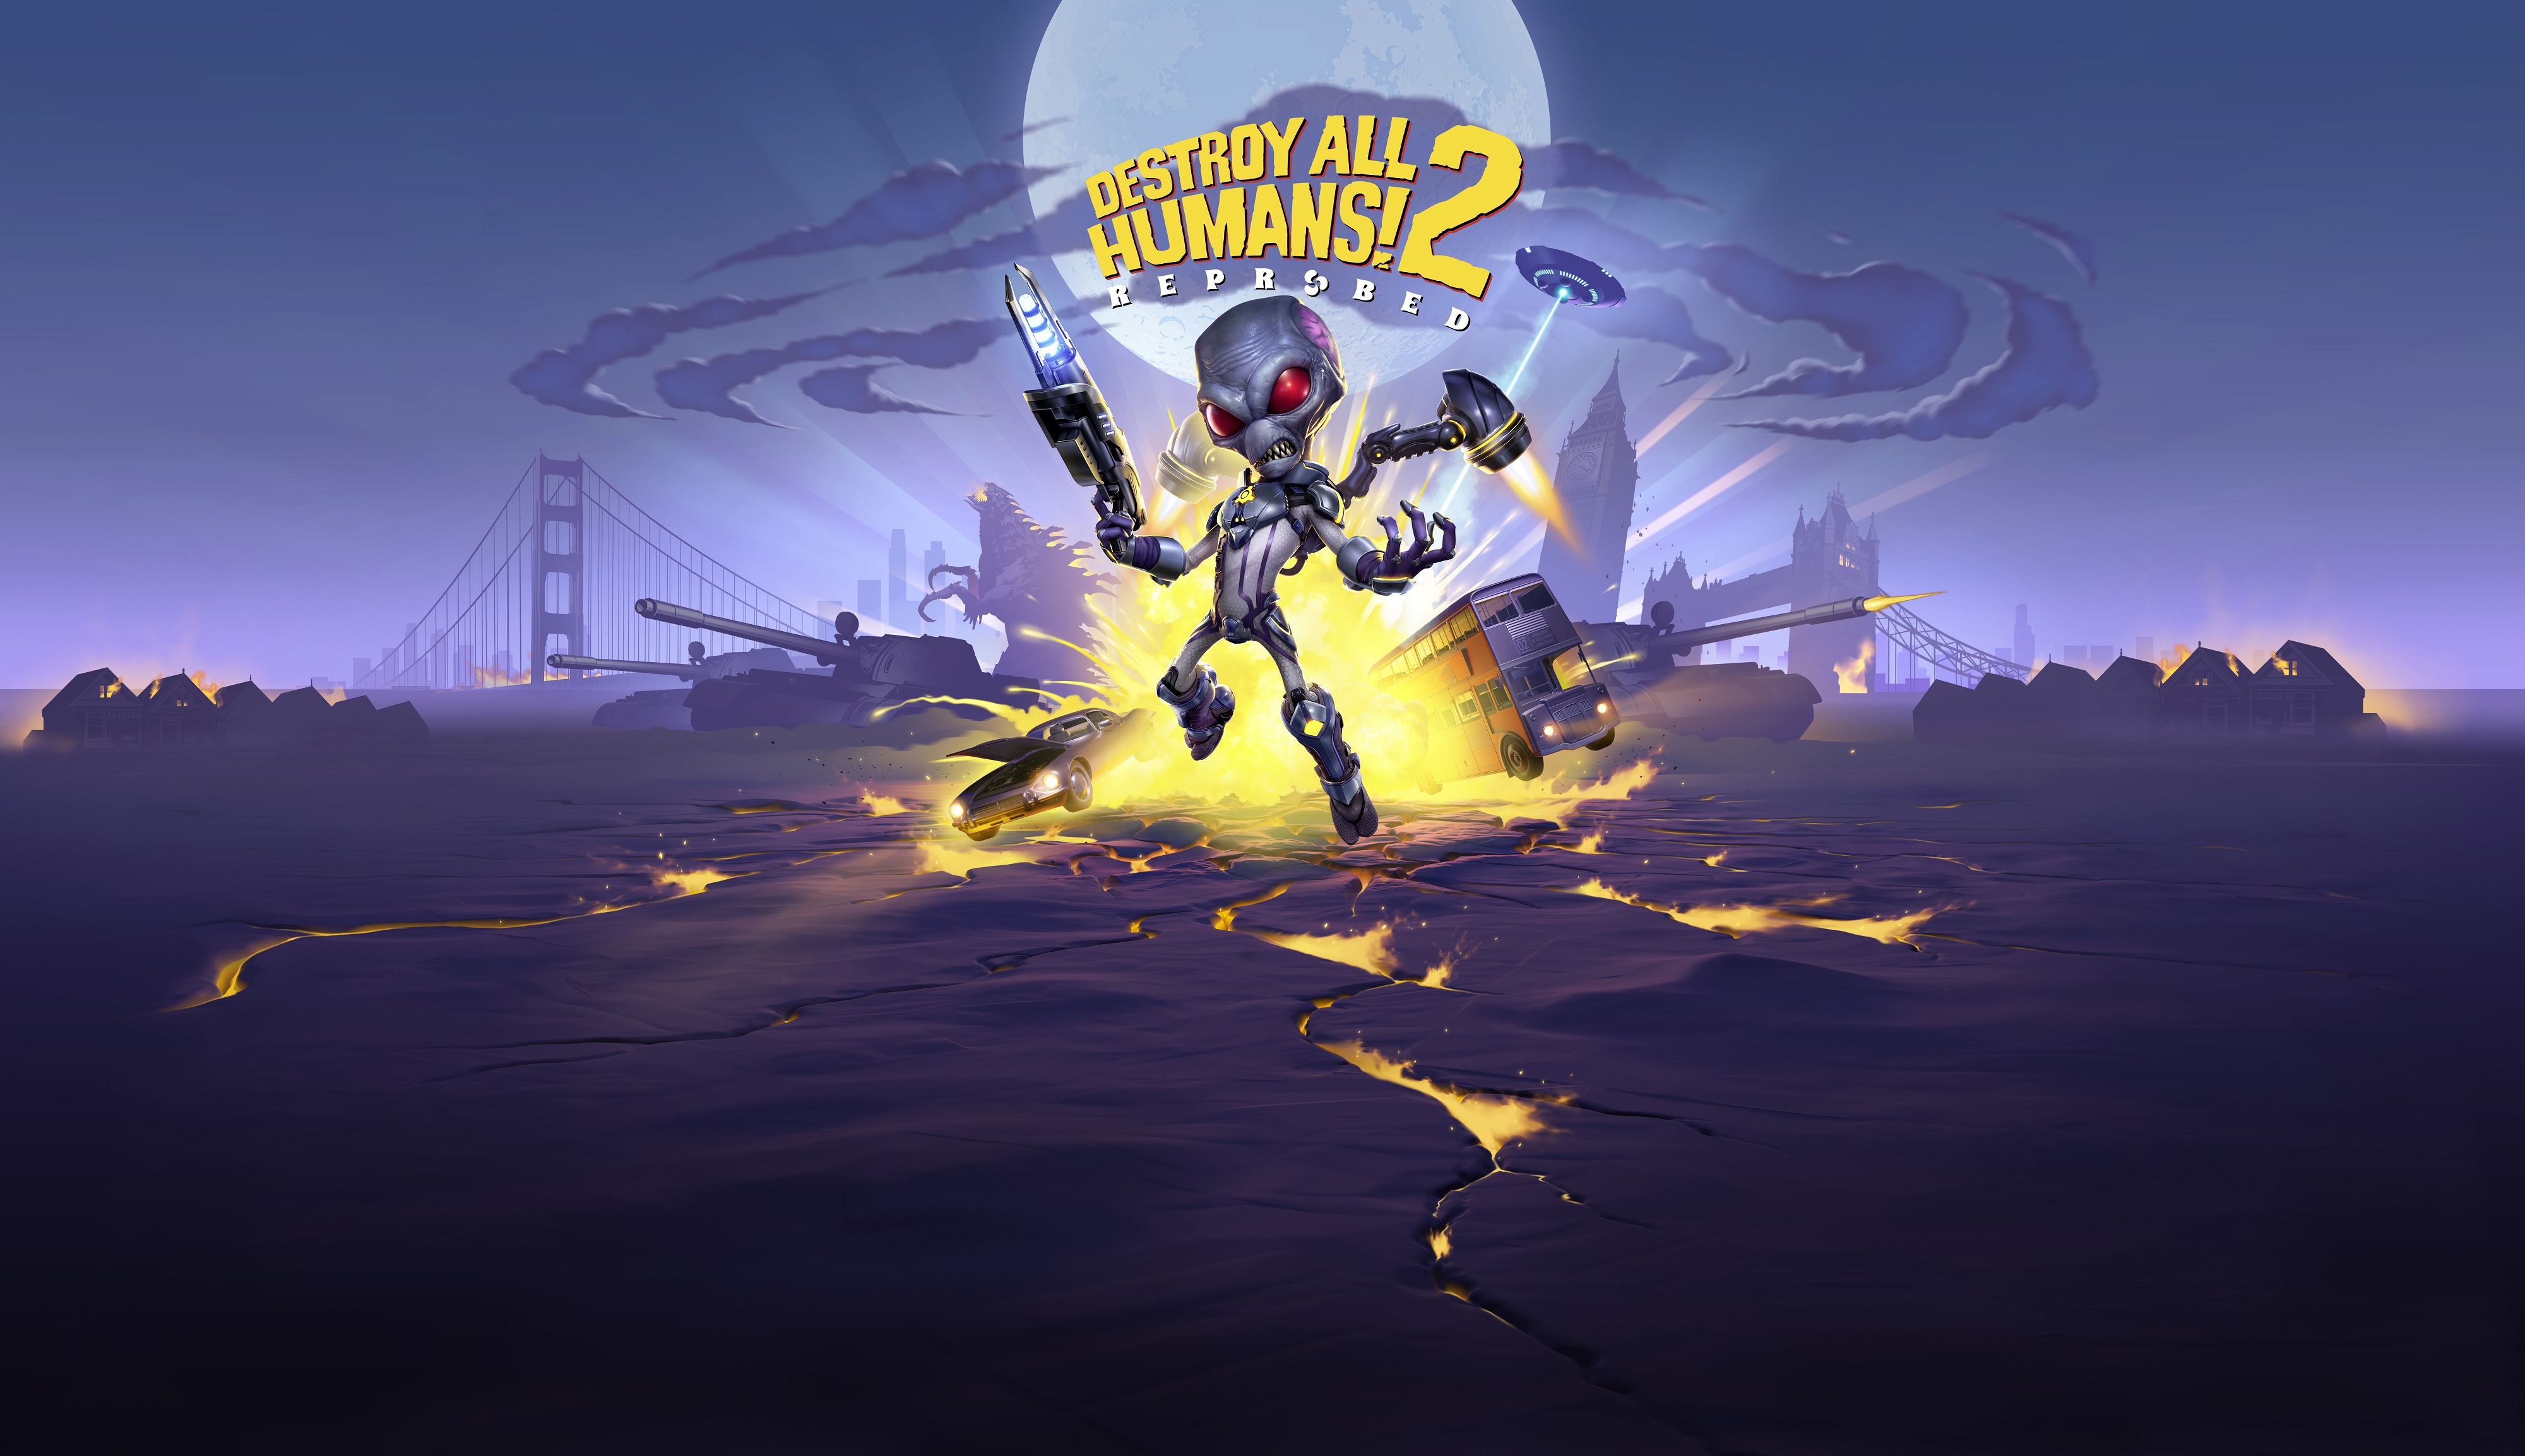 Destroy all humans reprobed. Destroy all Humans 2 reprobed. Destroy all Humans 2 reprobed Wallpaper. Игра destroy all Humans. Игра destroy all Humans 2.